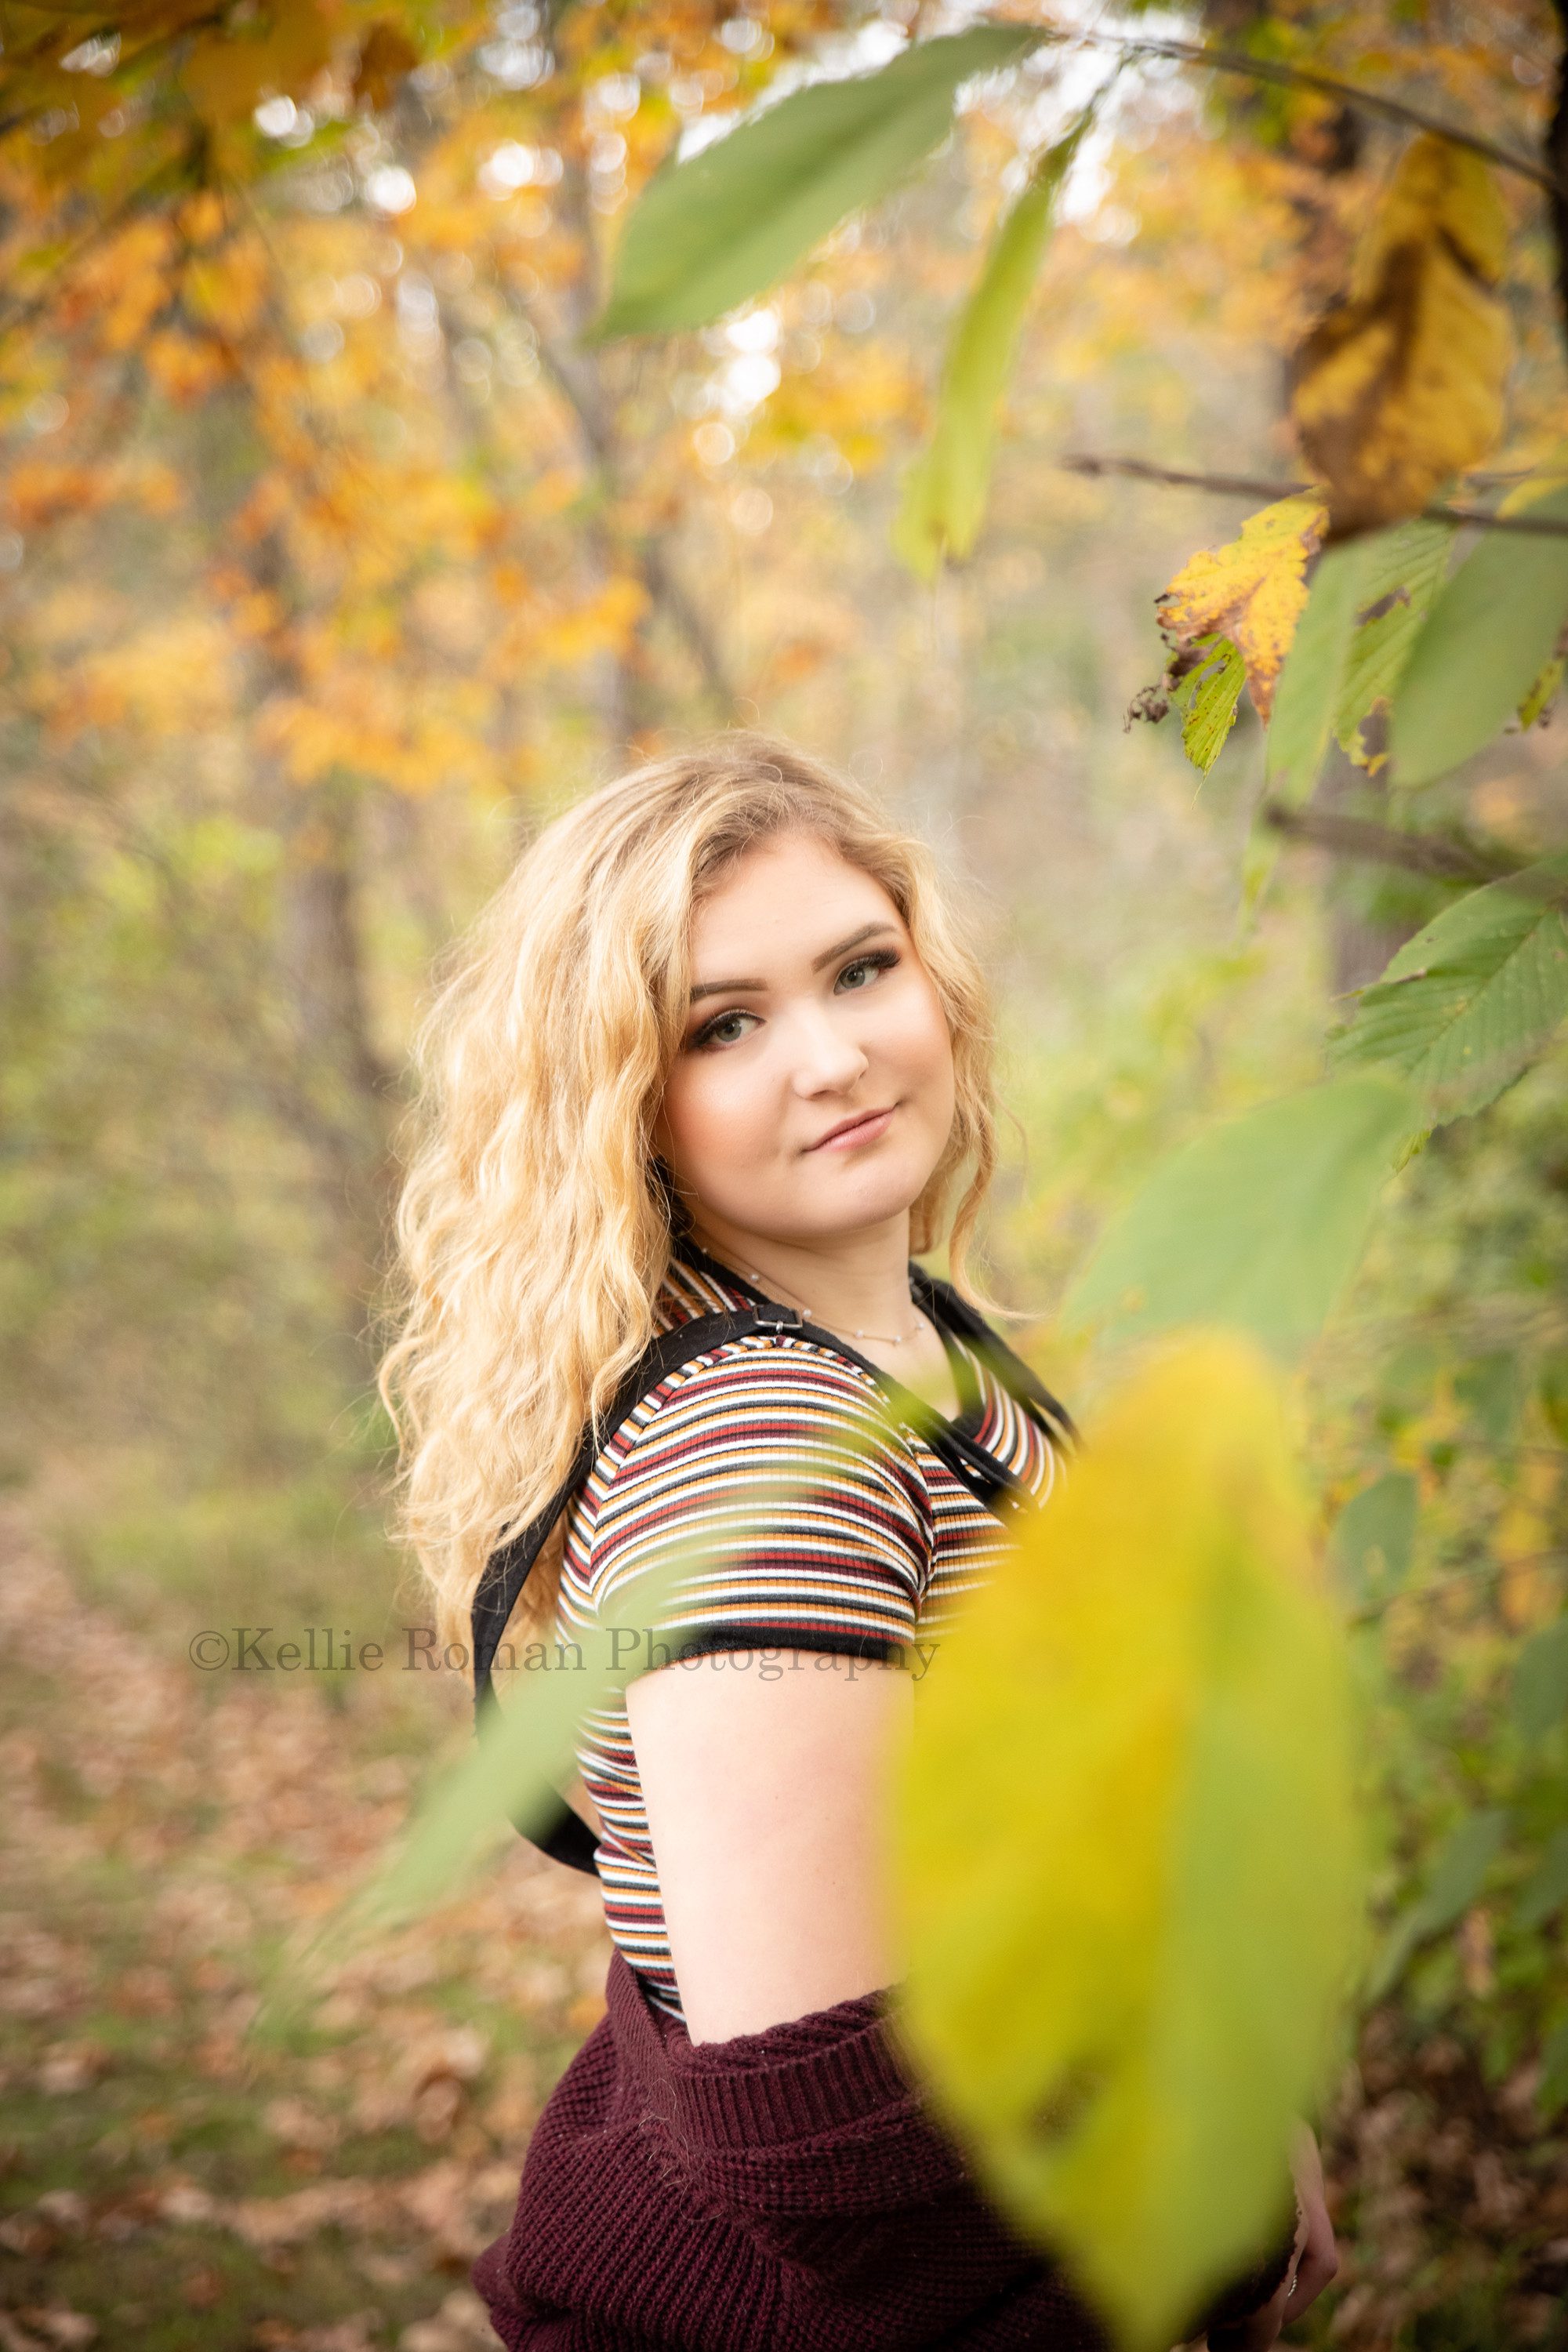 milwaukee senior photographer a young girl in high school in kenosha Wisconsin park she's wearing a black dress with a burgundy sweater down around her arms she's standing behind yellow leaves and is looking into the camera she has blonde hair and blue eyes